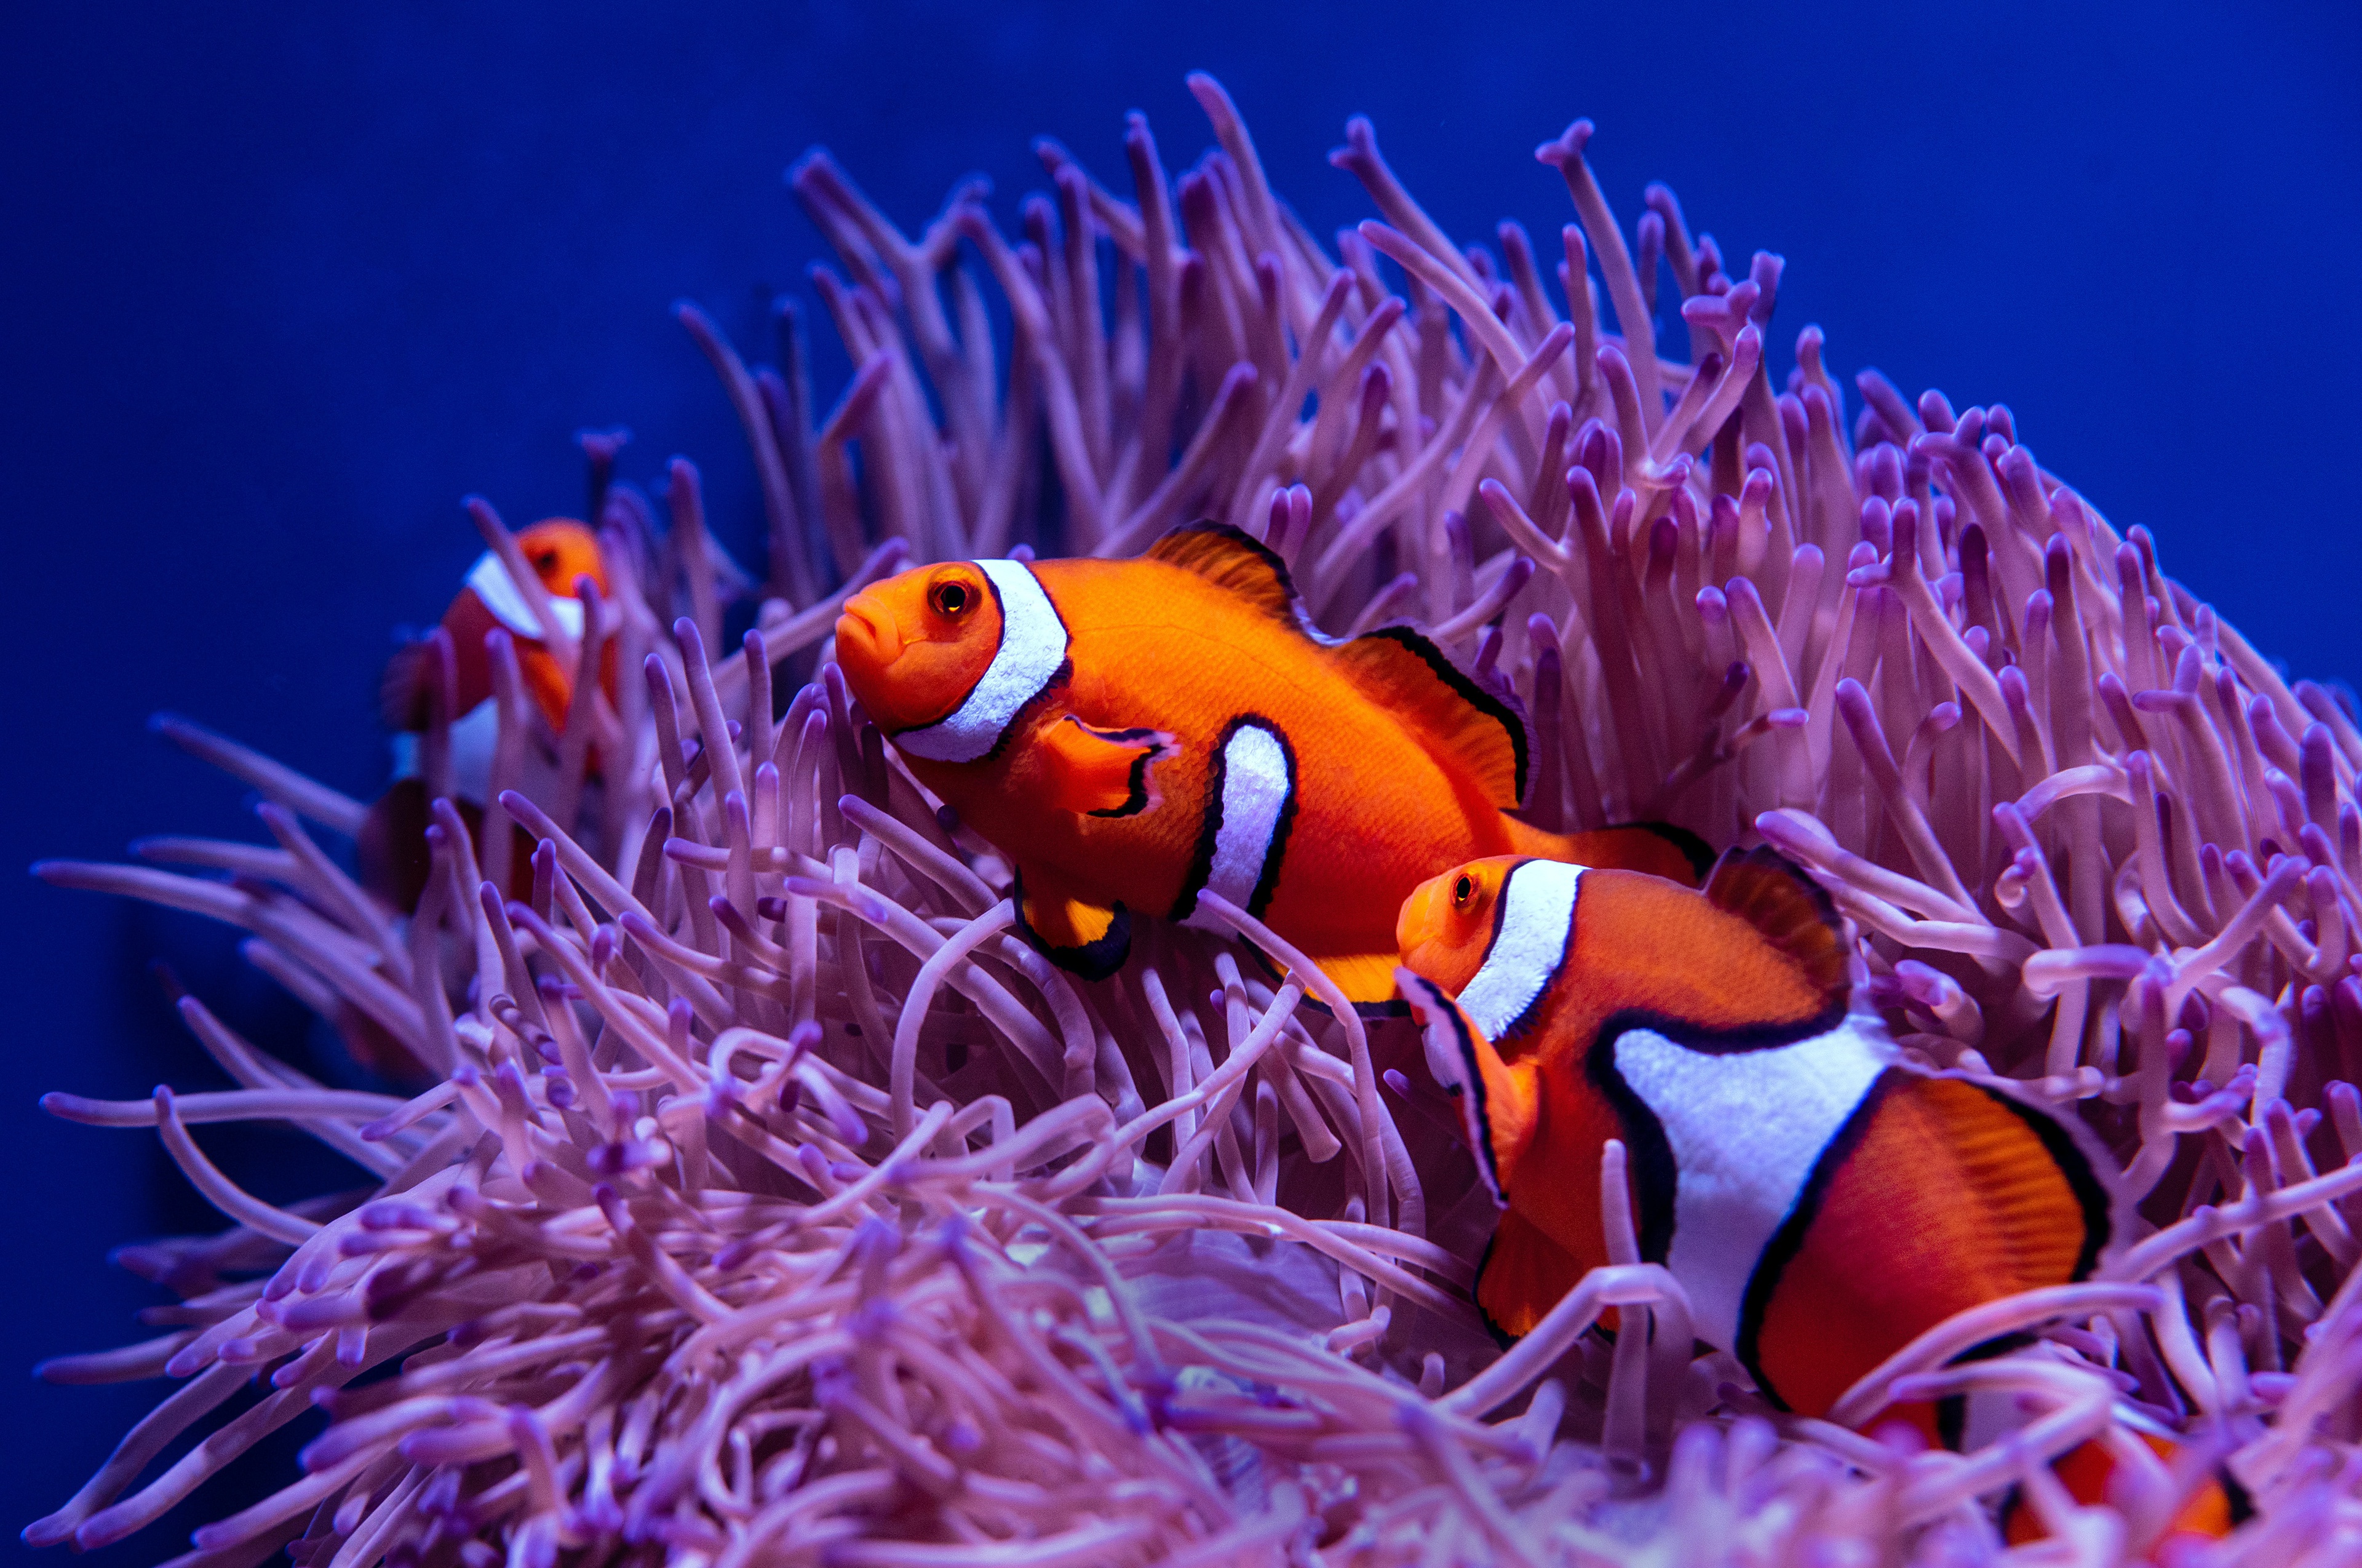 Colorful Clownfish Fishes Underwater Near Coral Reef HD Clownfish Wallpapers   HD Wallpapers  ID 75988